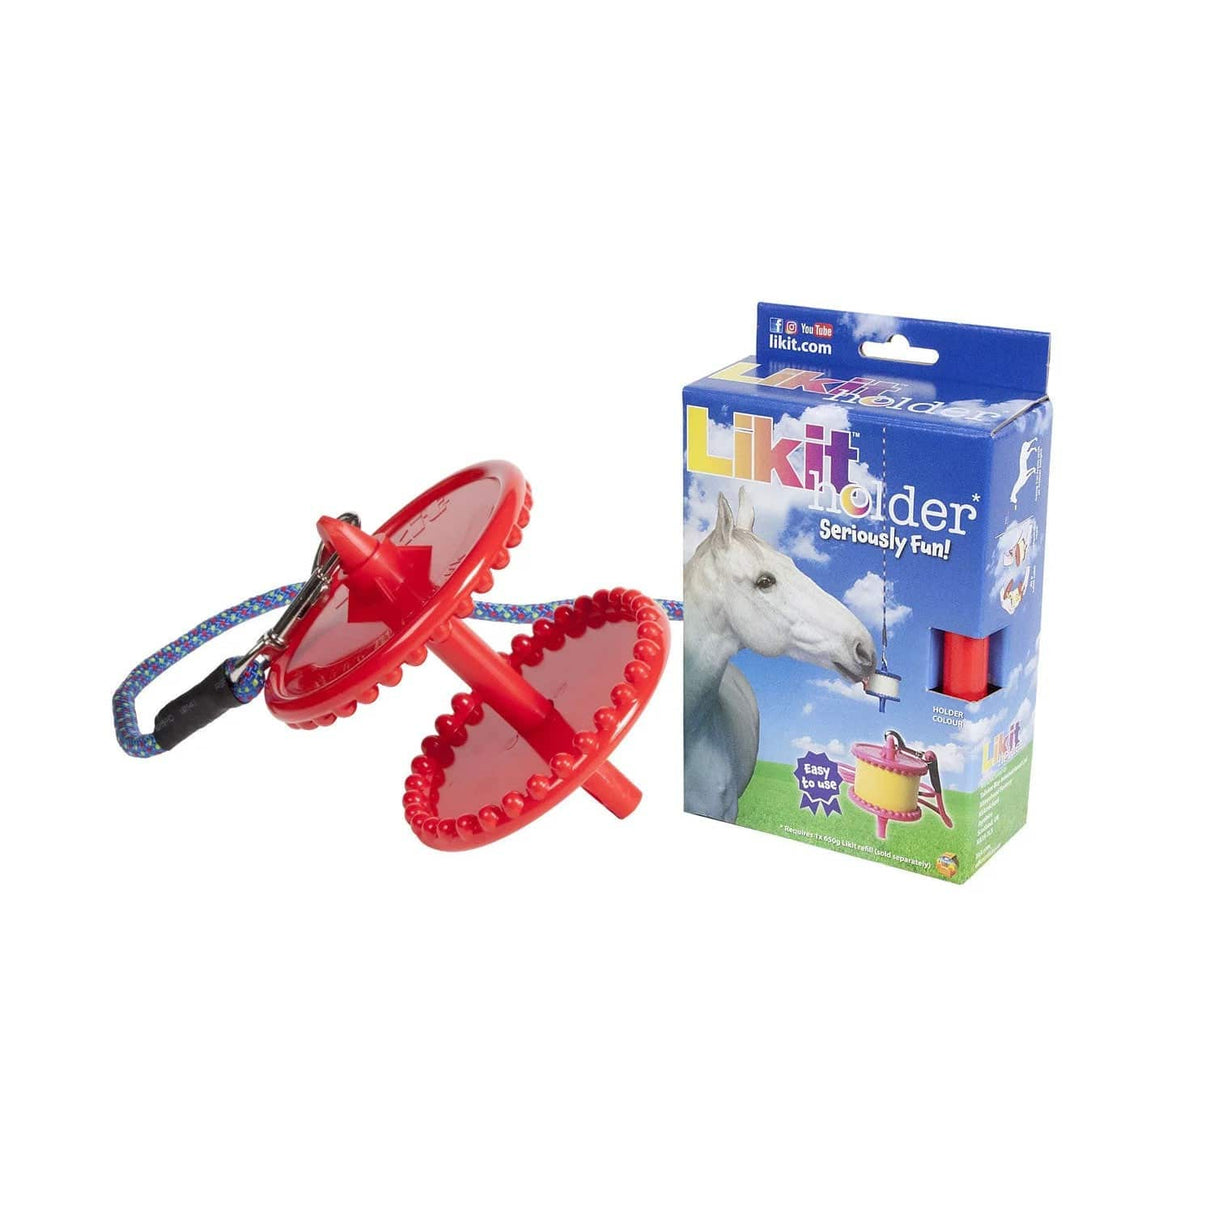 Likit Holder For Horse Treats Horse Licks Treats and Toys Red Barnstaple Equestrian Supplies